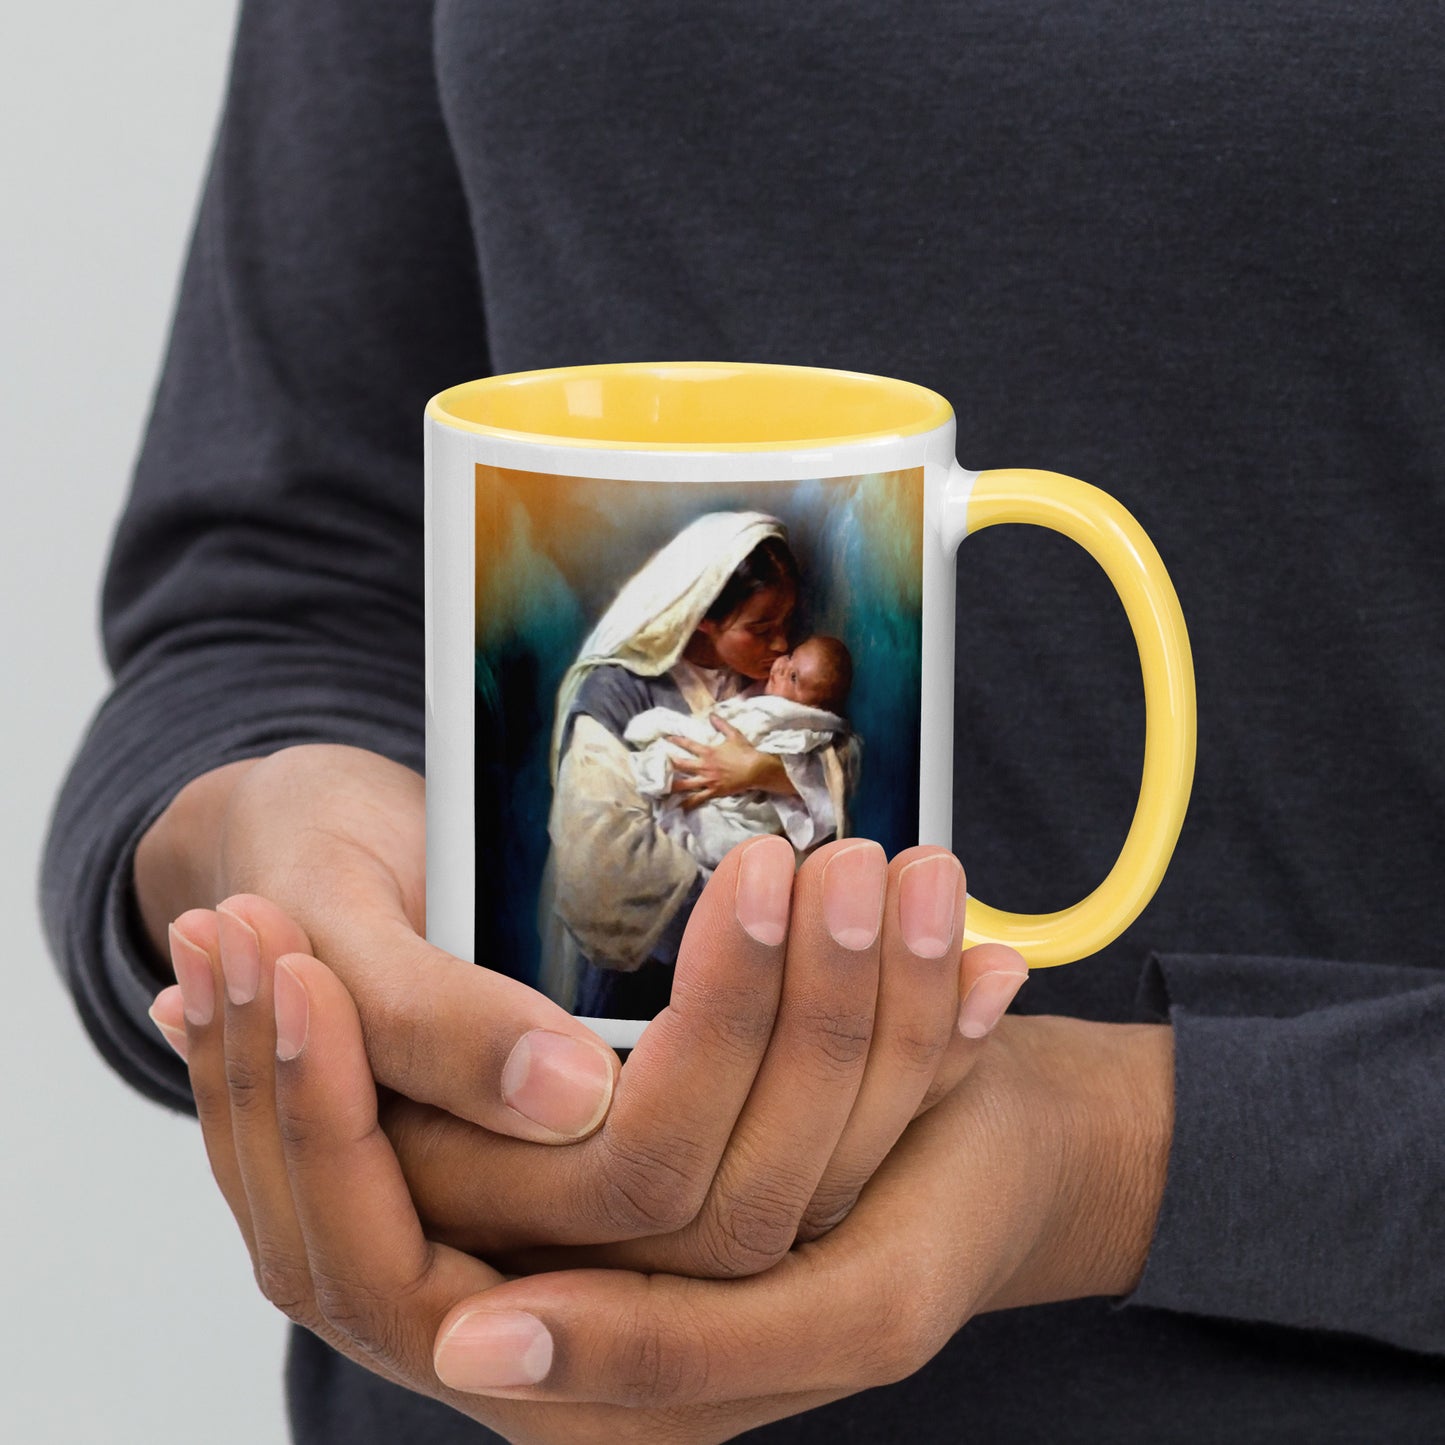 Blessed Mother Mug with Color Inside